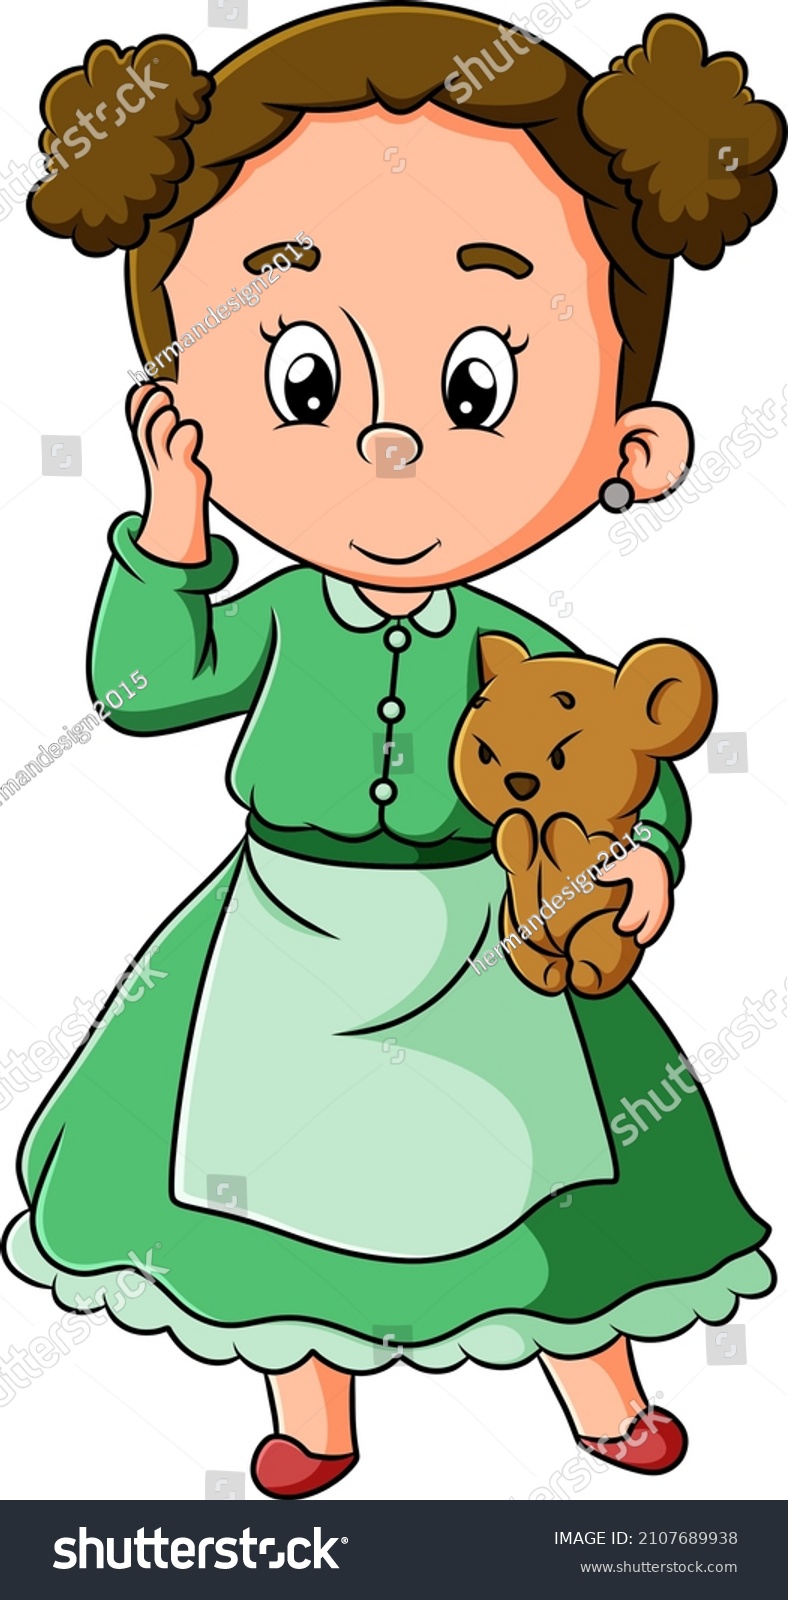 SVG of The little girl with the curly hair is holding the doll of illustration svg